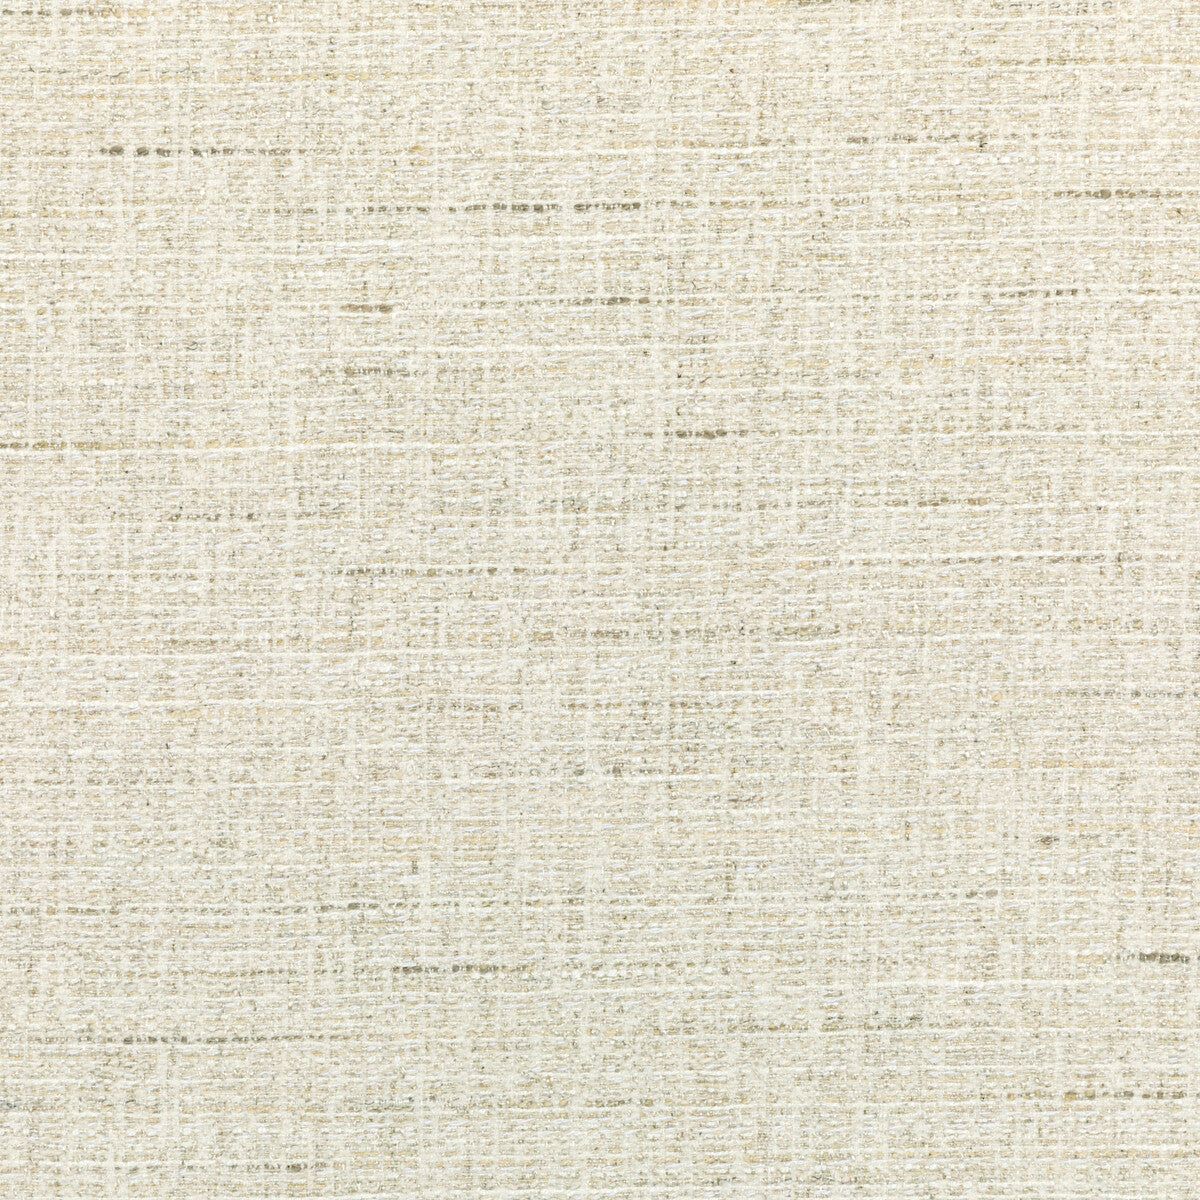 Kravet Couture fabric in 36602-16 color - pattern 36602.16.0 - by Kravet Couture in the Mabley Handler collection